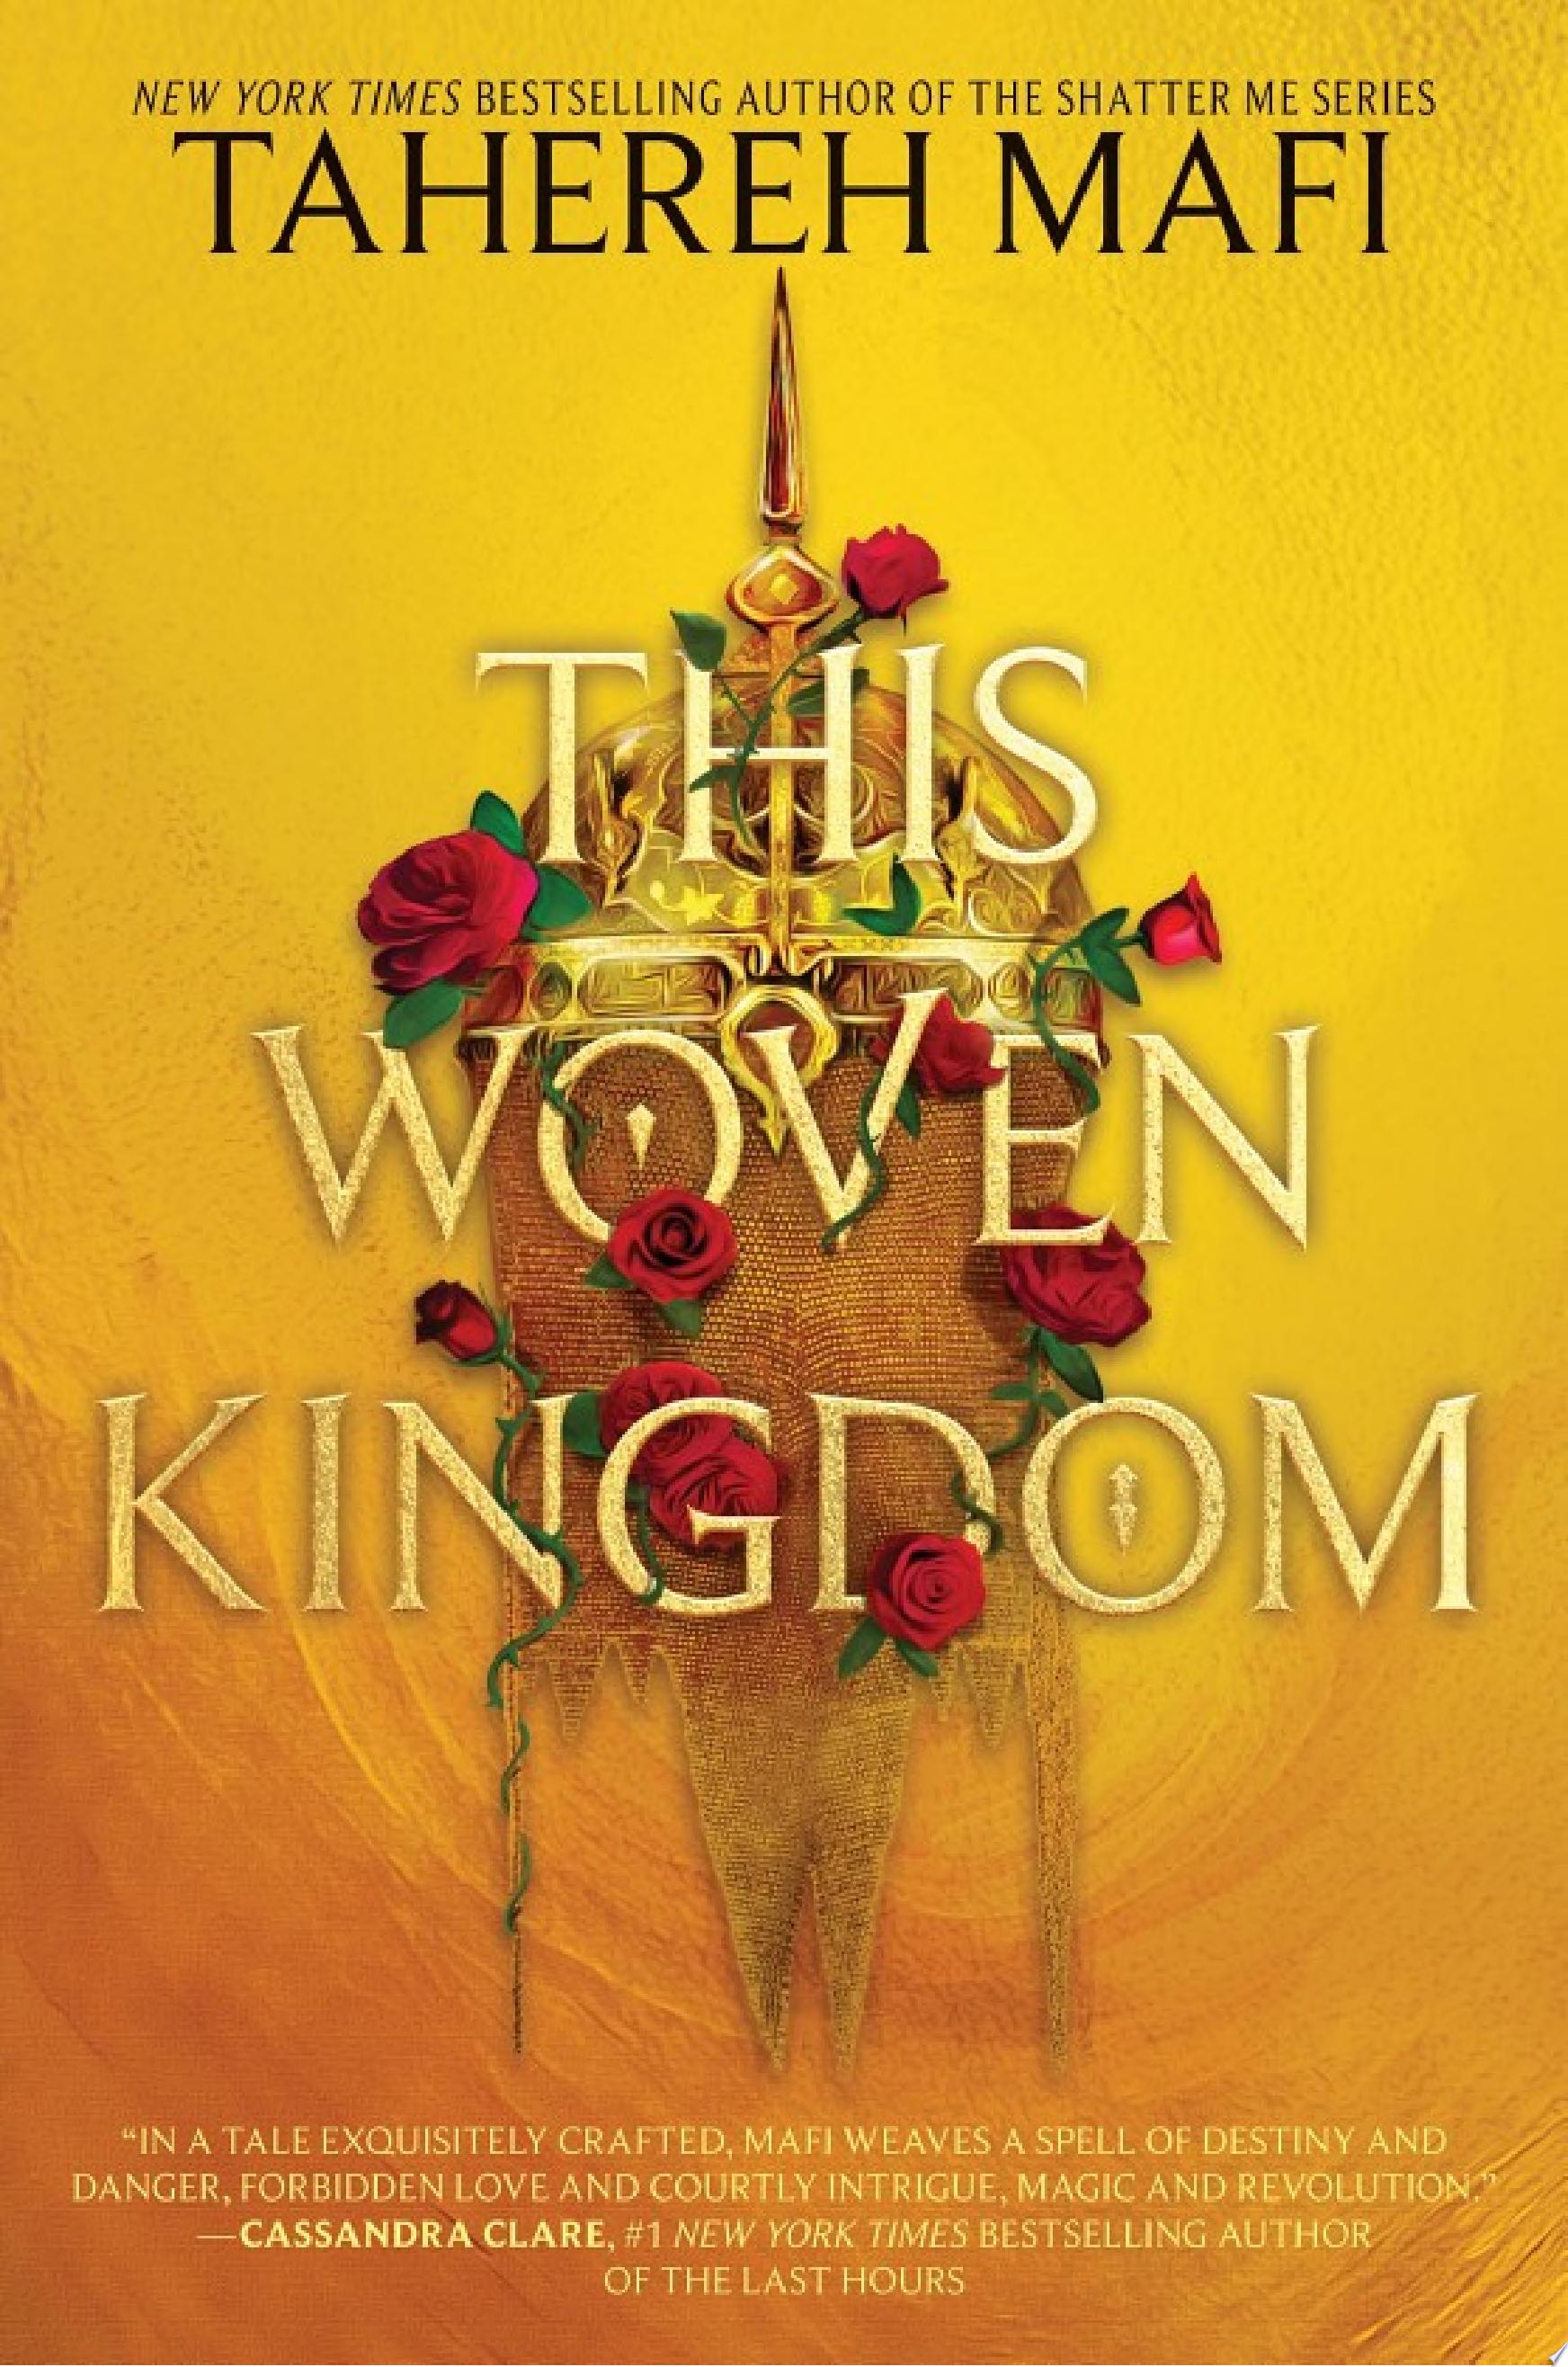 Image for "This Woven Kingdom"